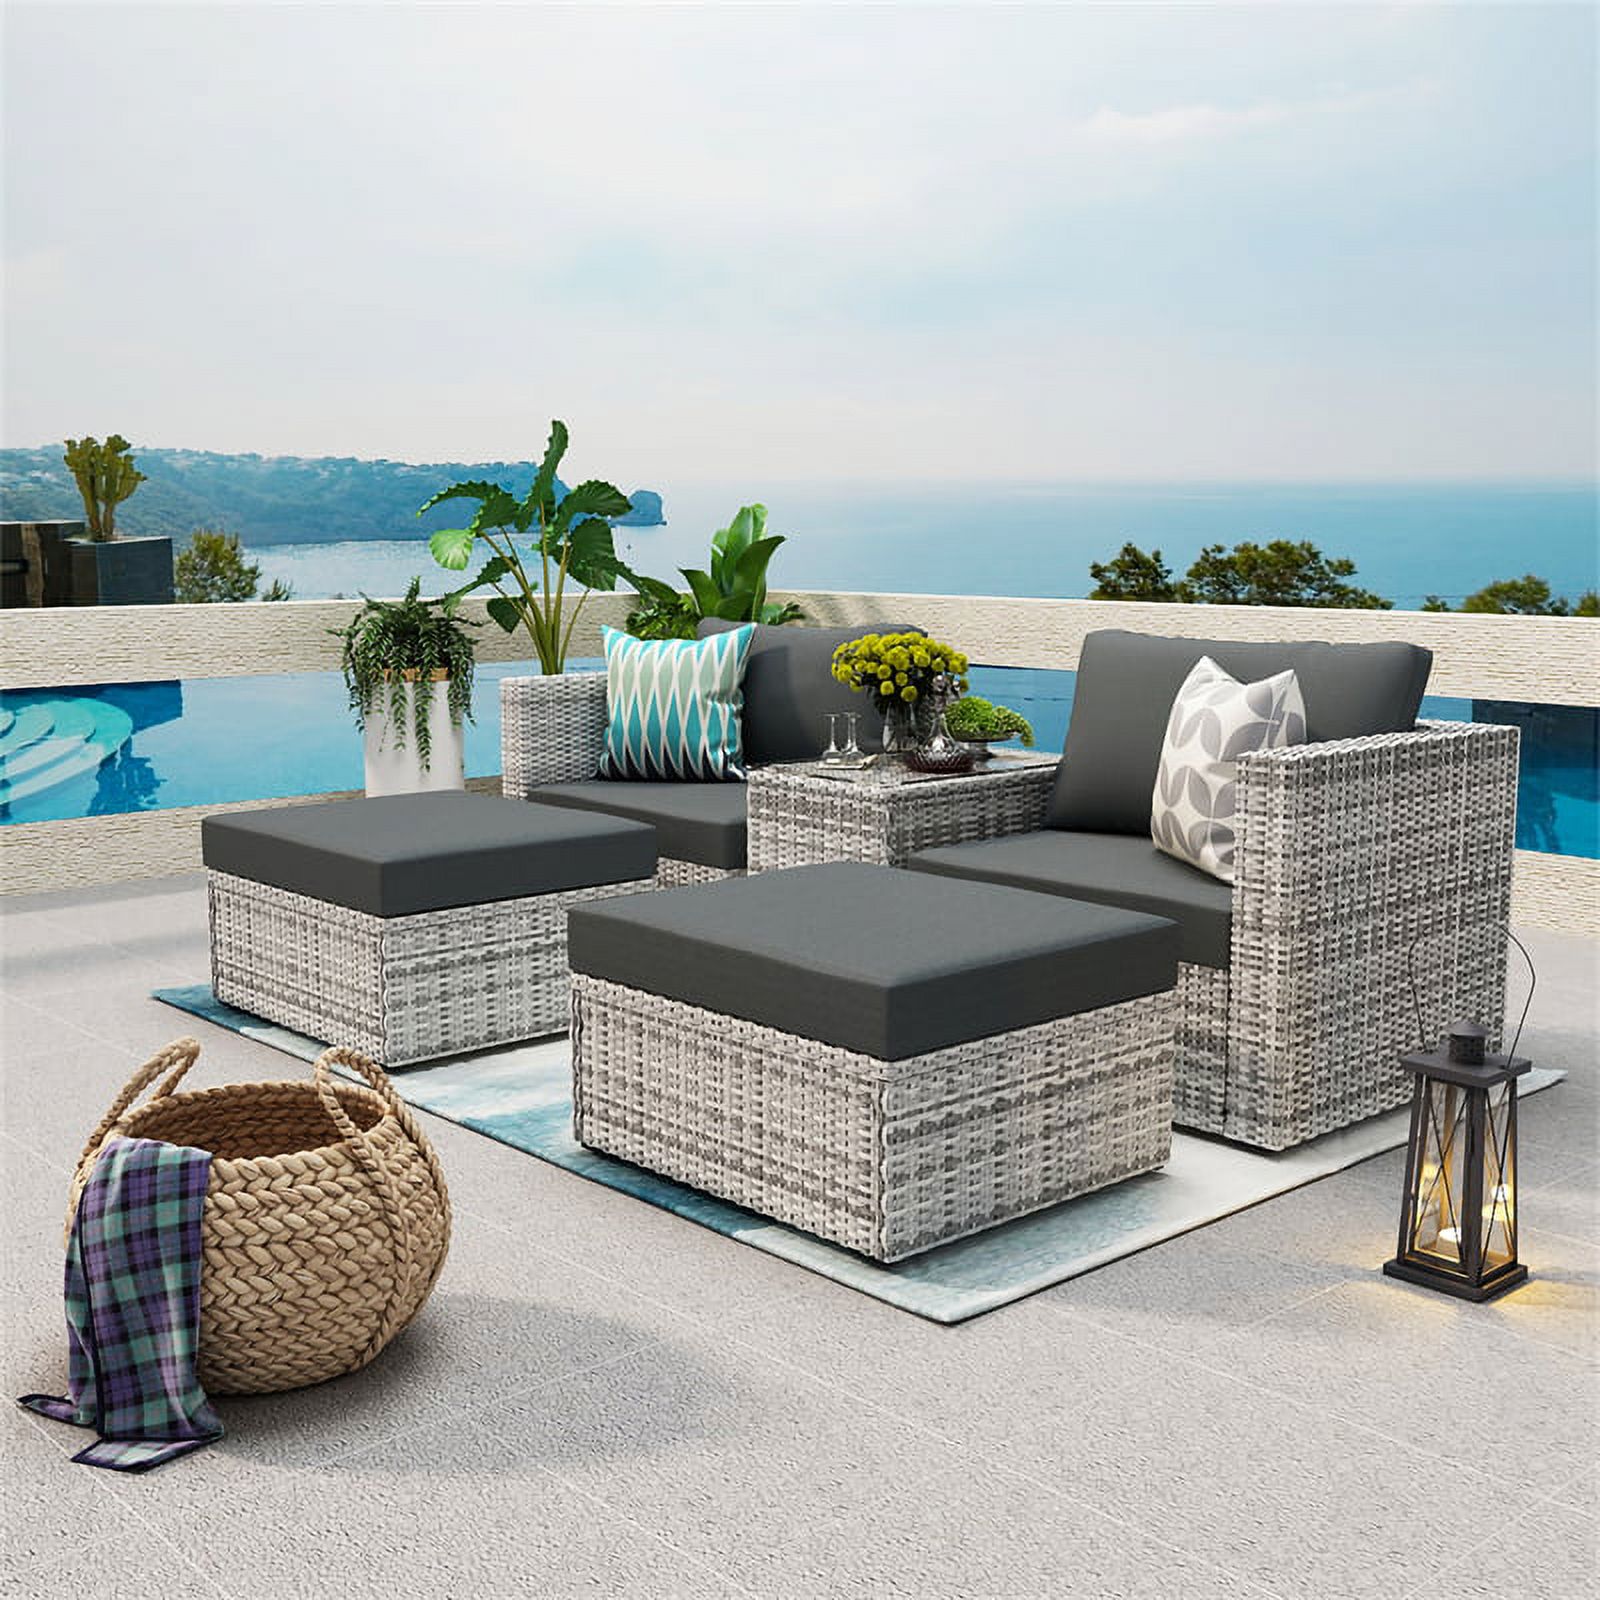 5 Pieces Outdoor Patio Sectional Sofa Set, Gray Rattan and Cushion with Weather Protecting Cover, Patio Sofa Sets with 2 Rattan Chairs, 2 Pieces Patio Rattan Ottomans and Coffee Table - image 1 of 7